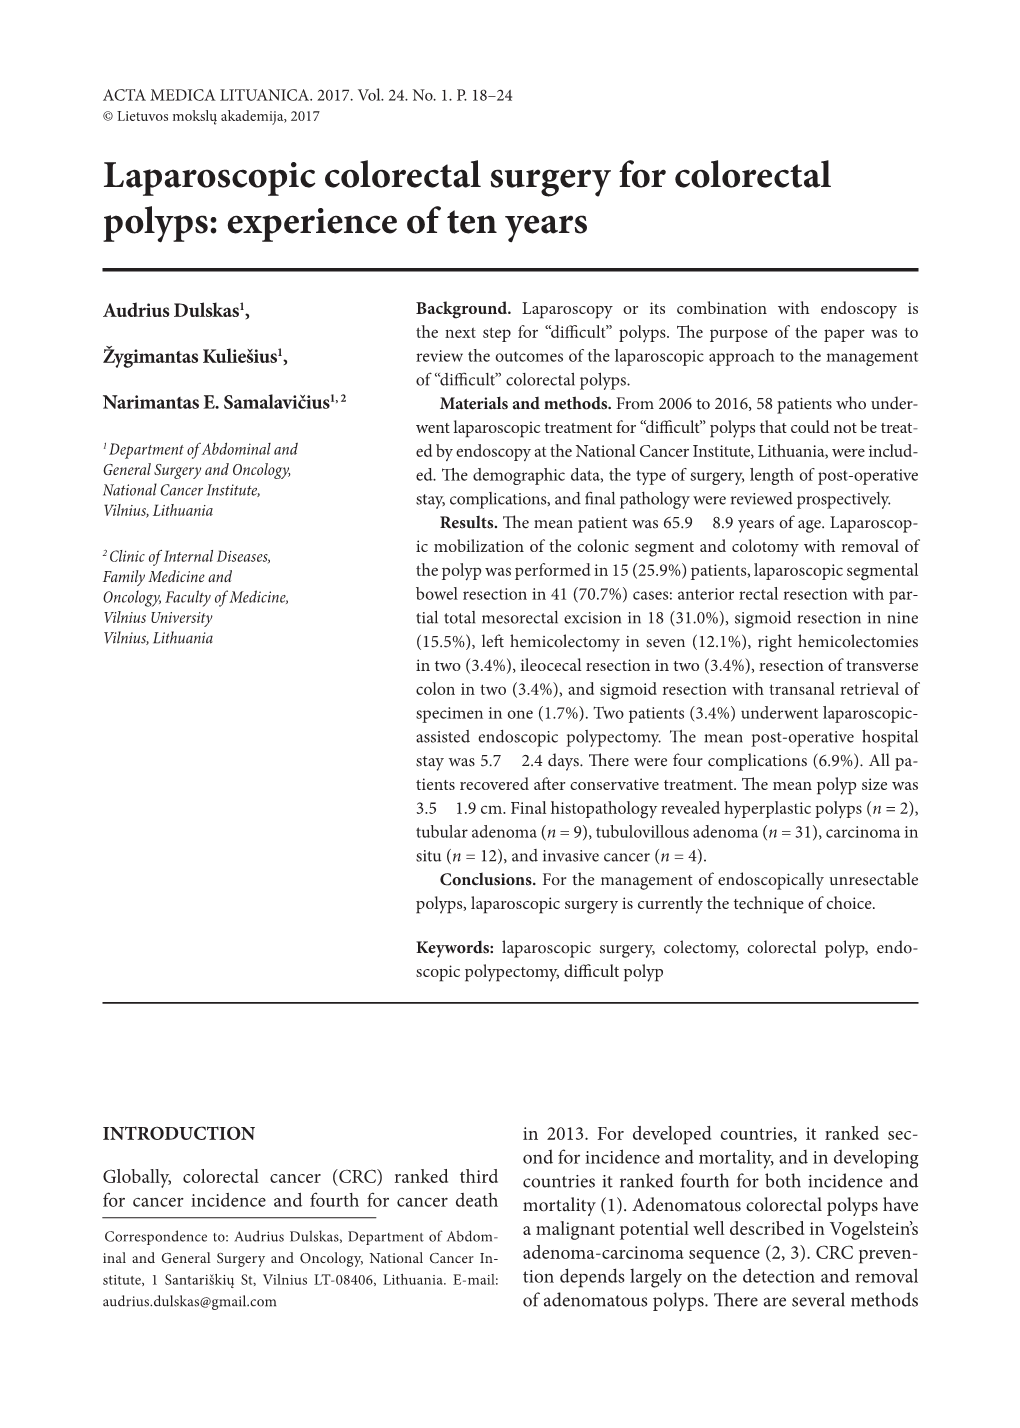 Laparoscopic Colorectal Surgery for Colorectal Polyps: Experience of Ten Years